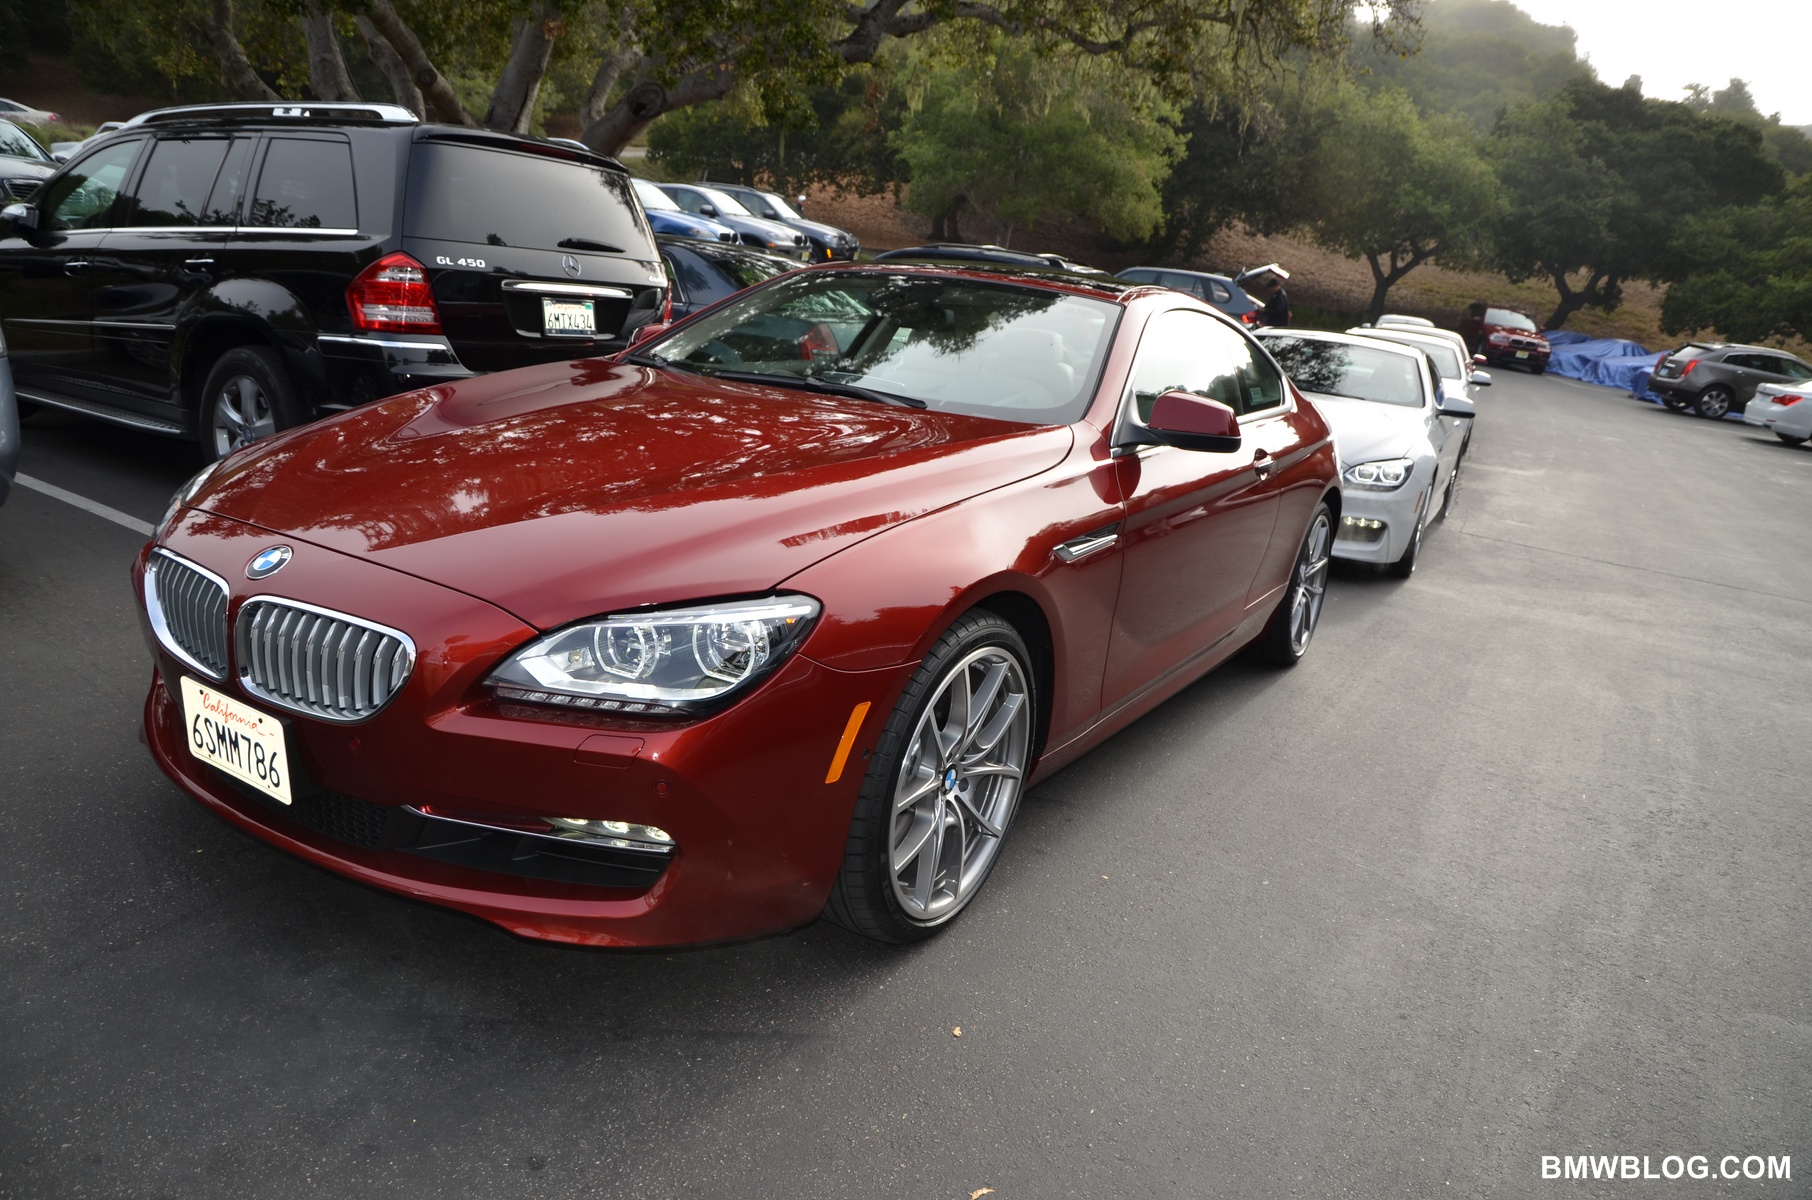 Video: 2012 BMW 650i Coupe with M-Sport Package